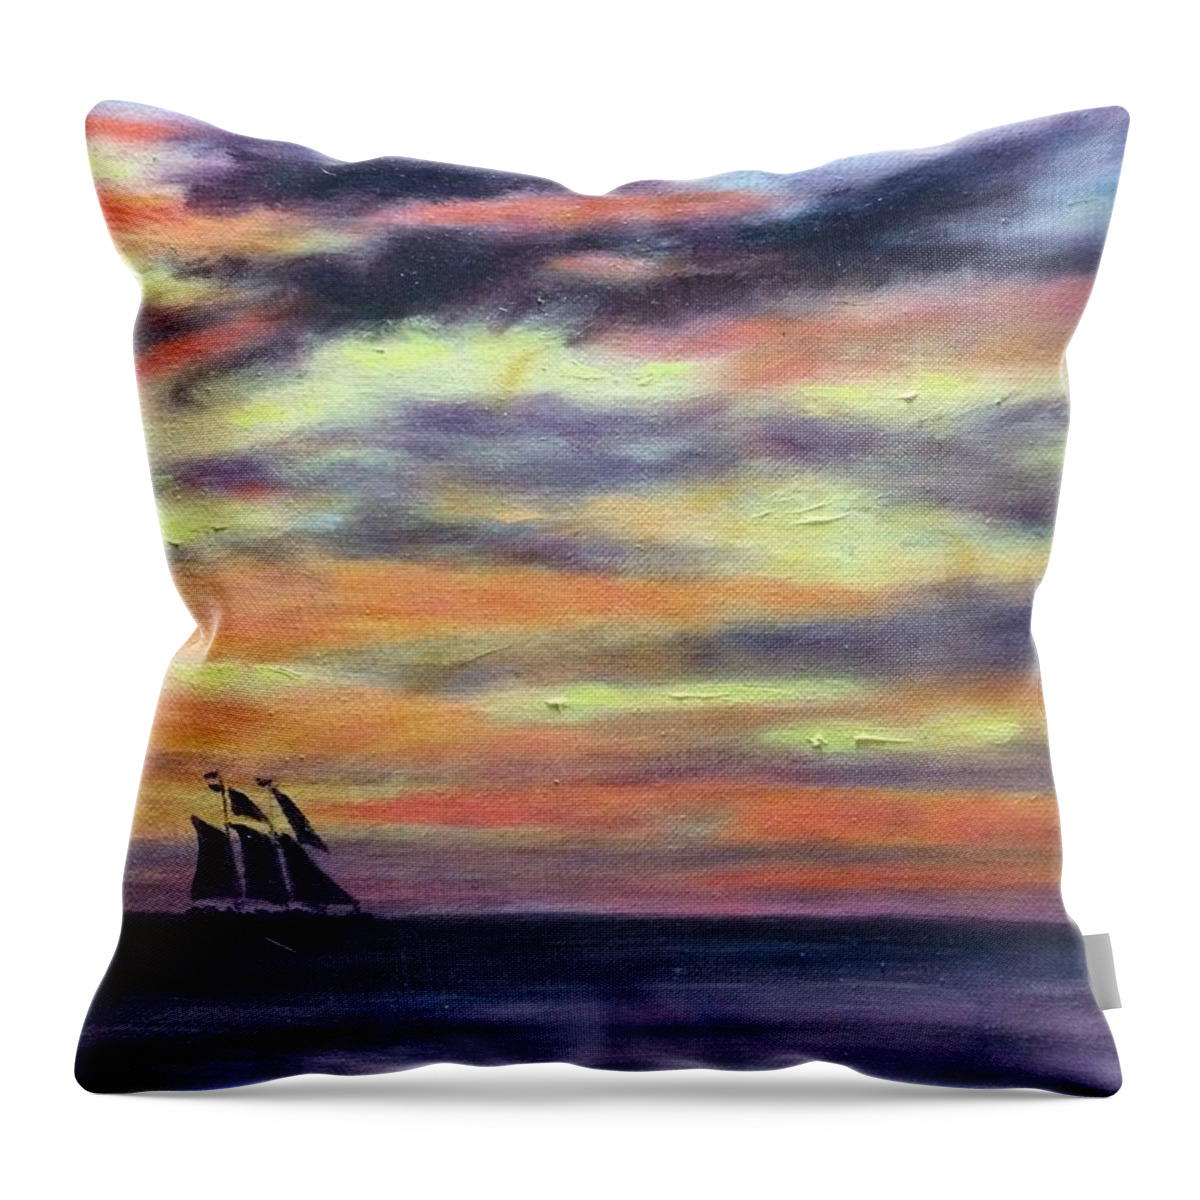 Water Throw Pillow featuring the painting Evening in Paradise by Paula Emery